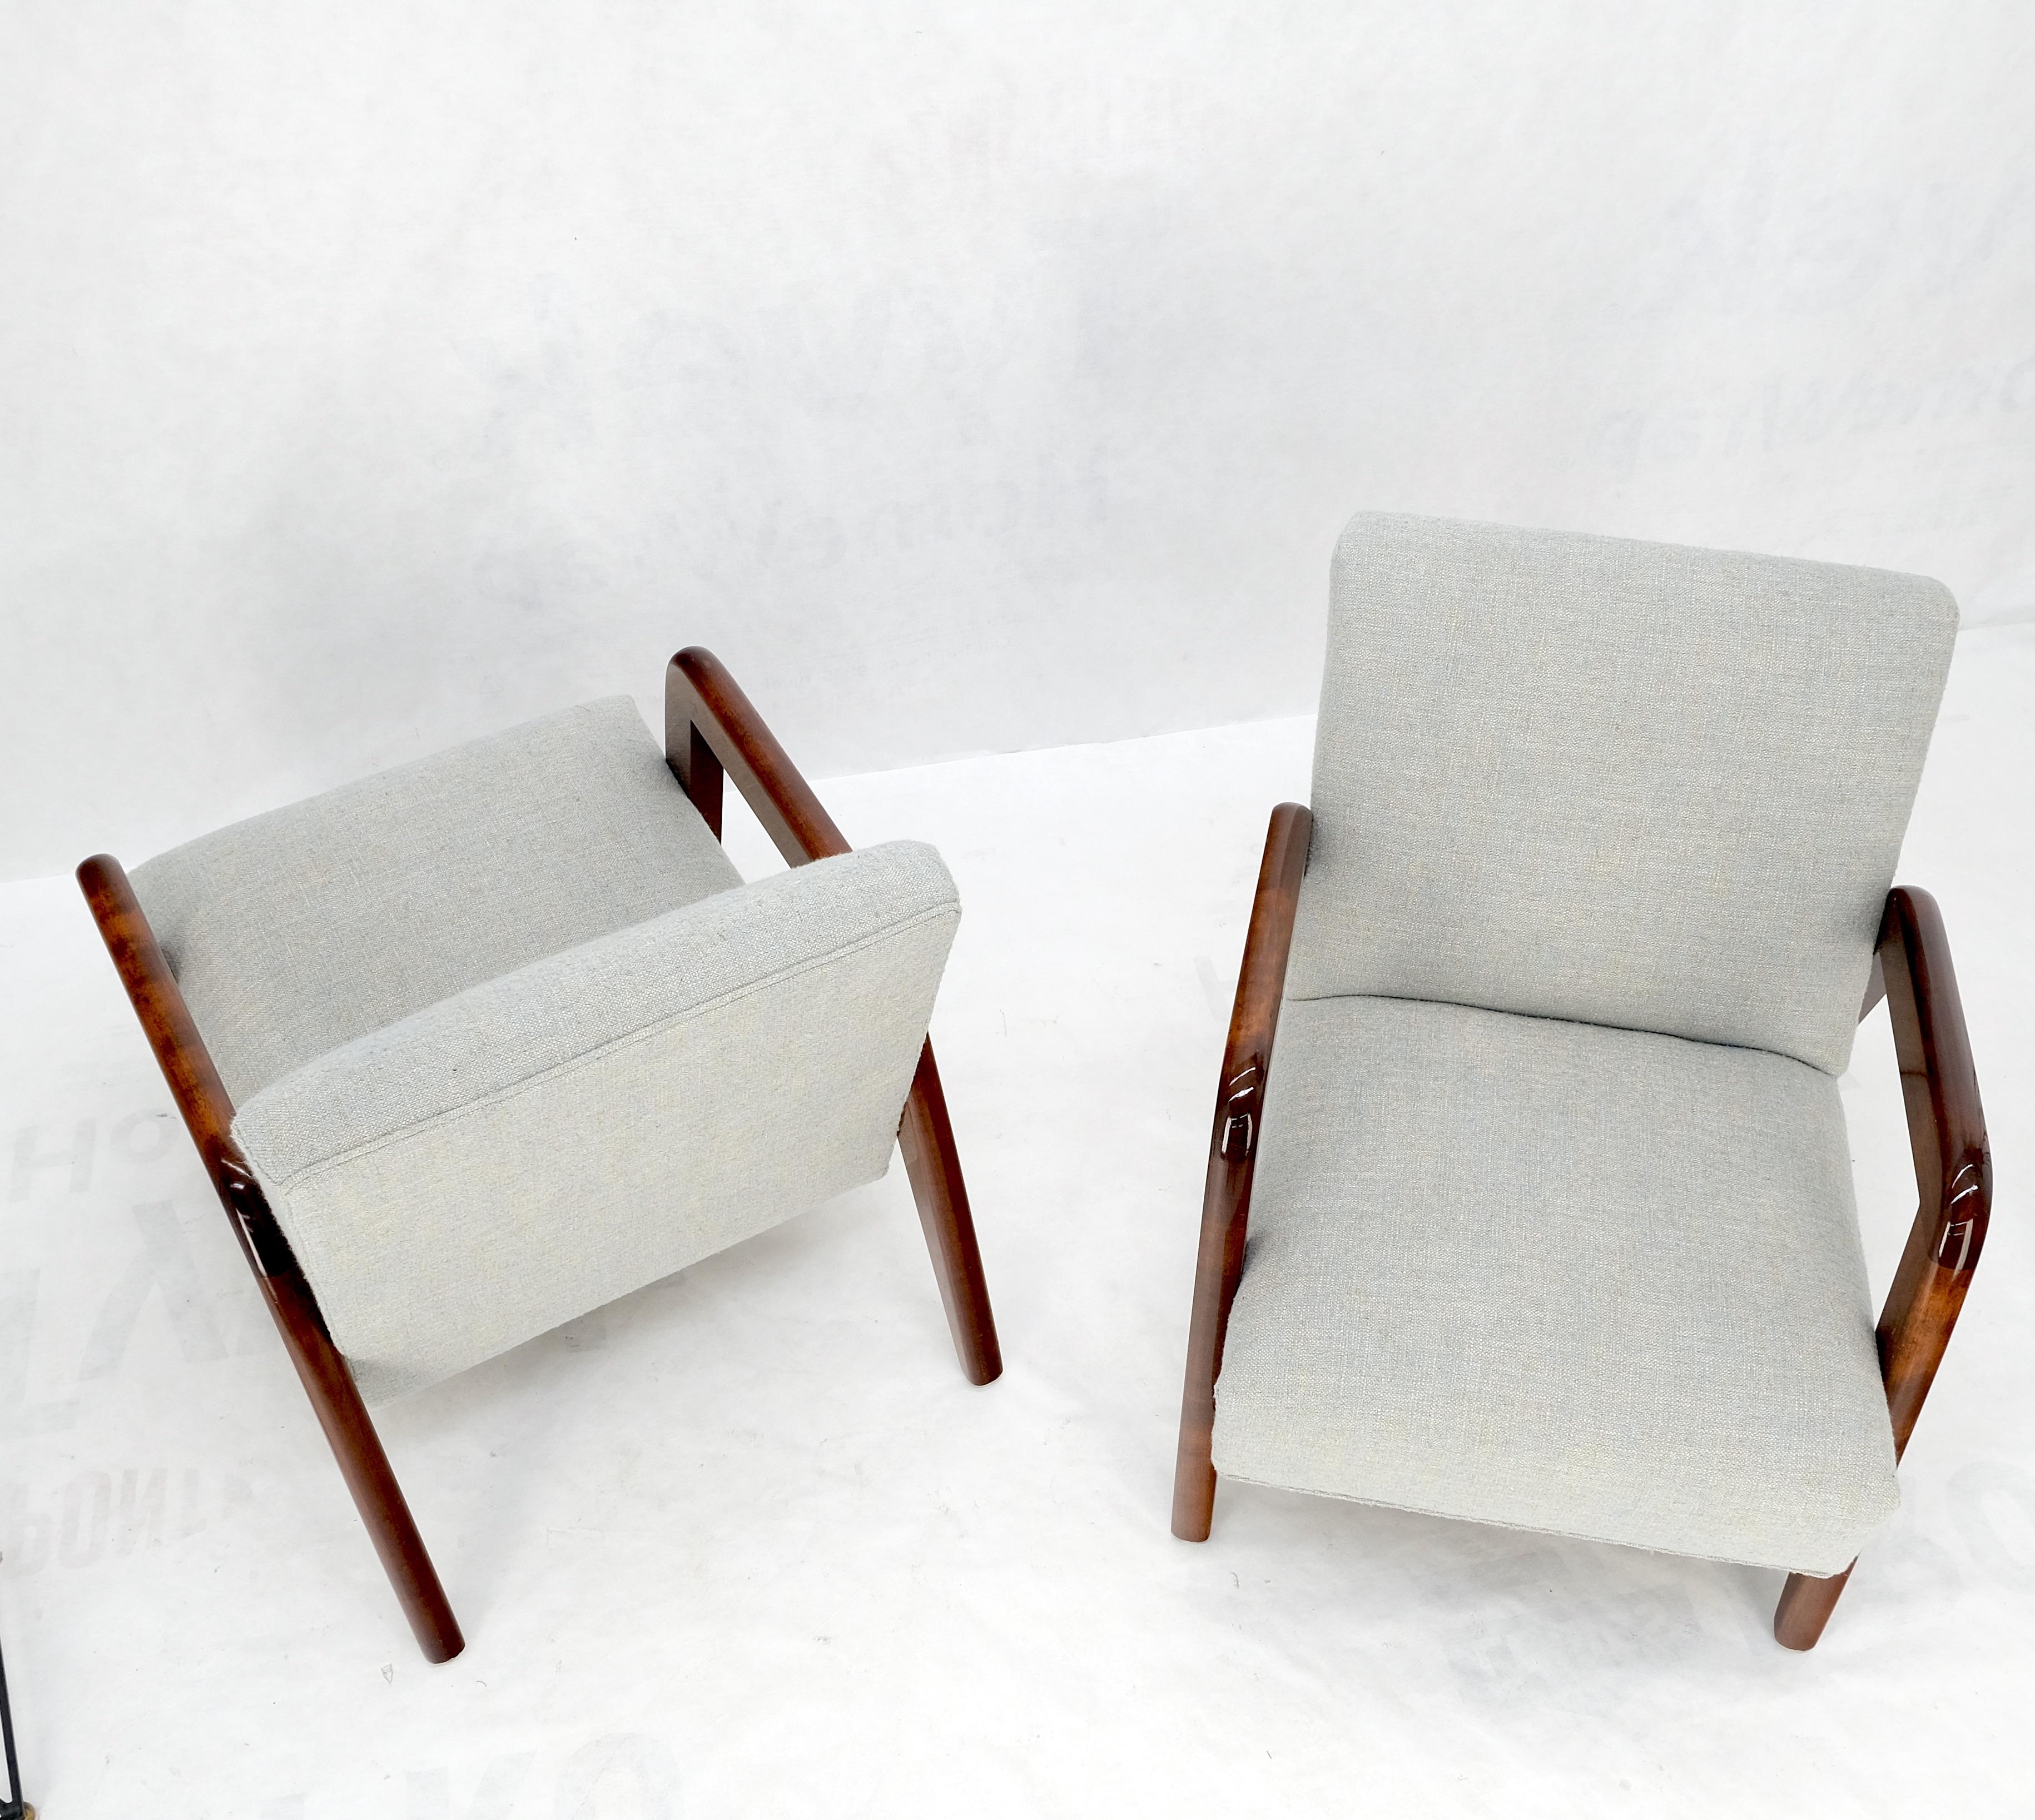 Pair New Leinen Polsterung Heavy Solid Maple Frames American  Lounge Chairs MINT! im Angebot 5